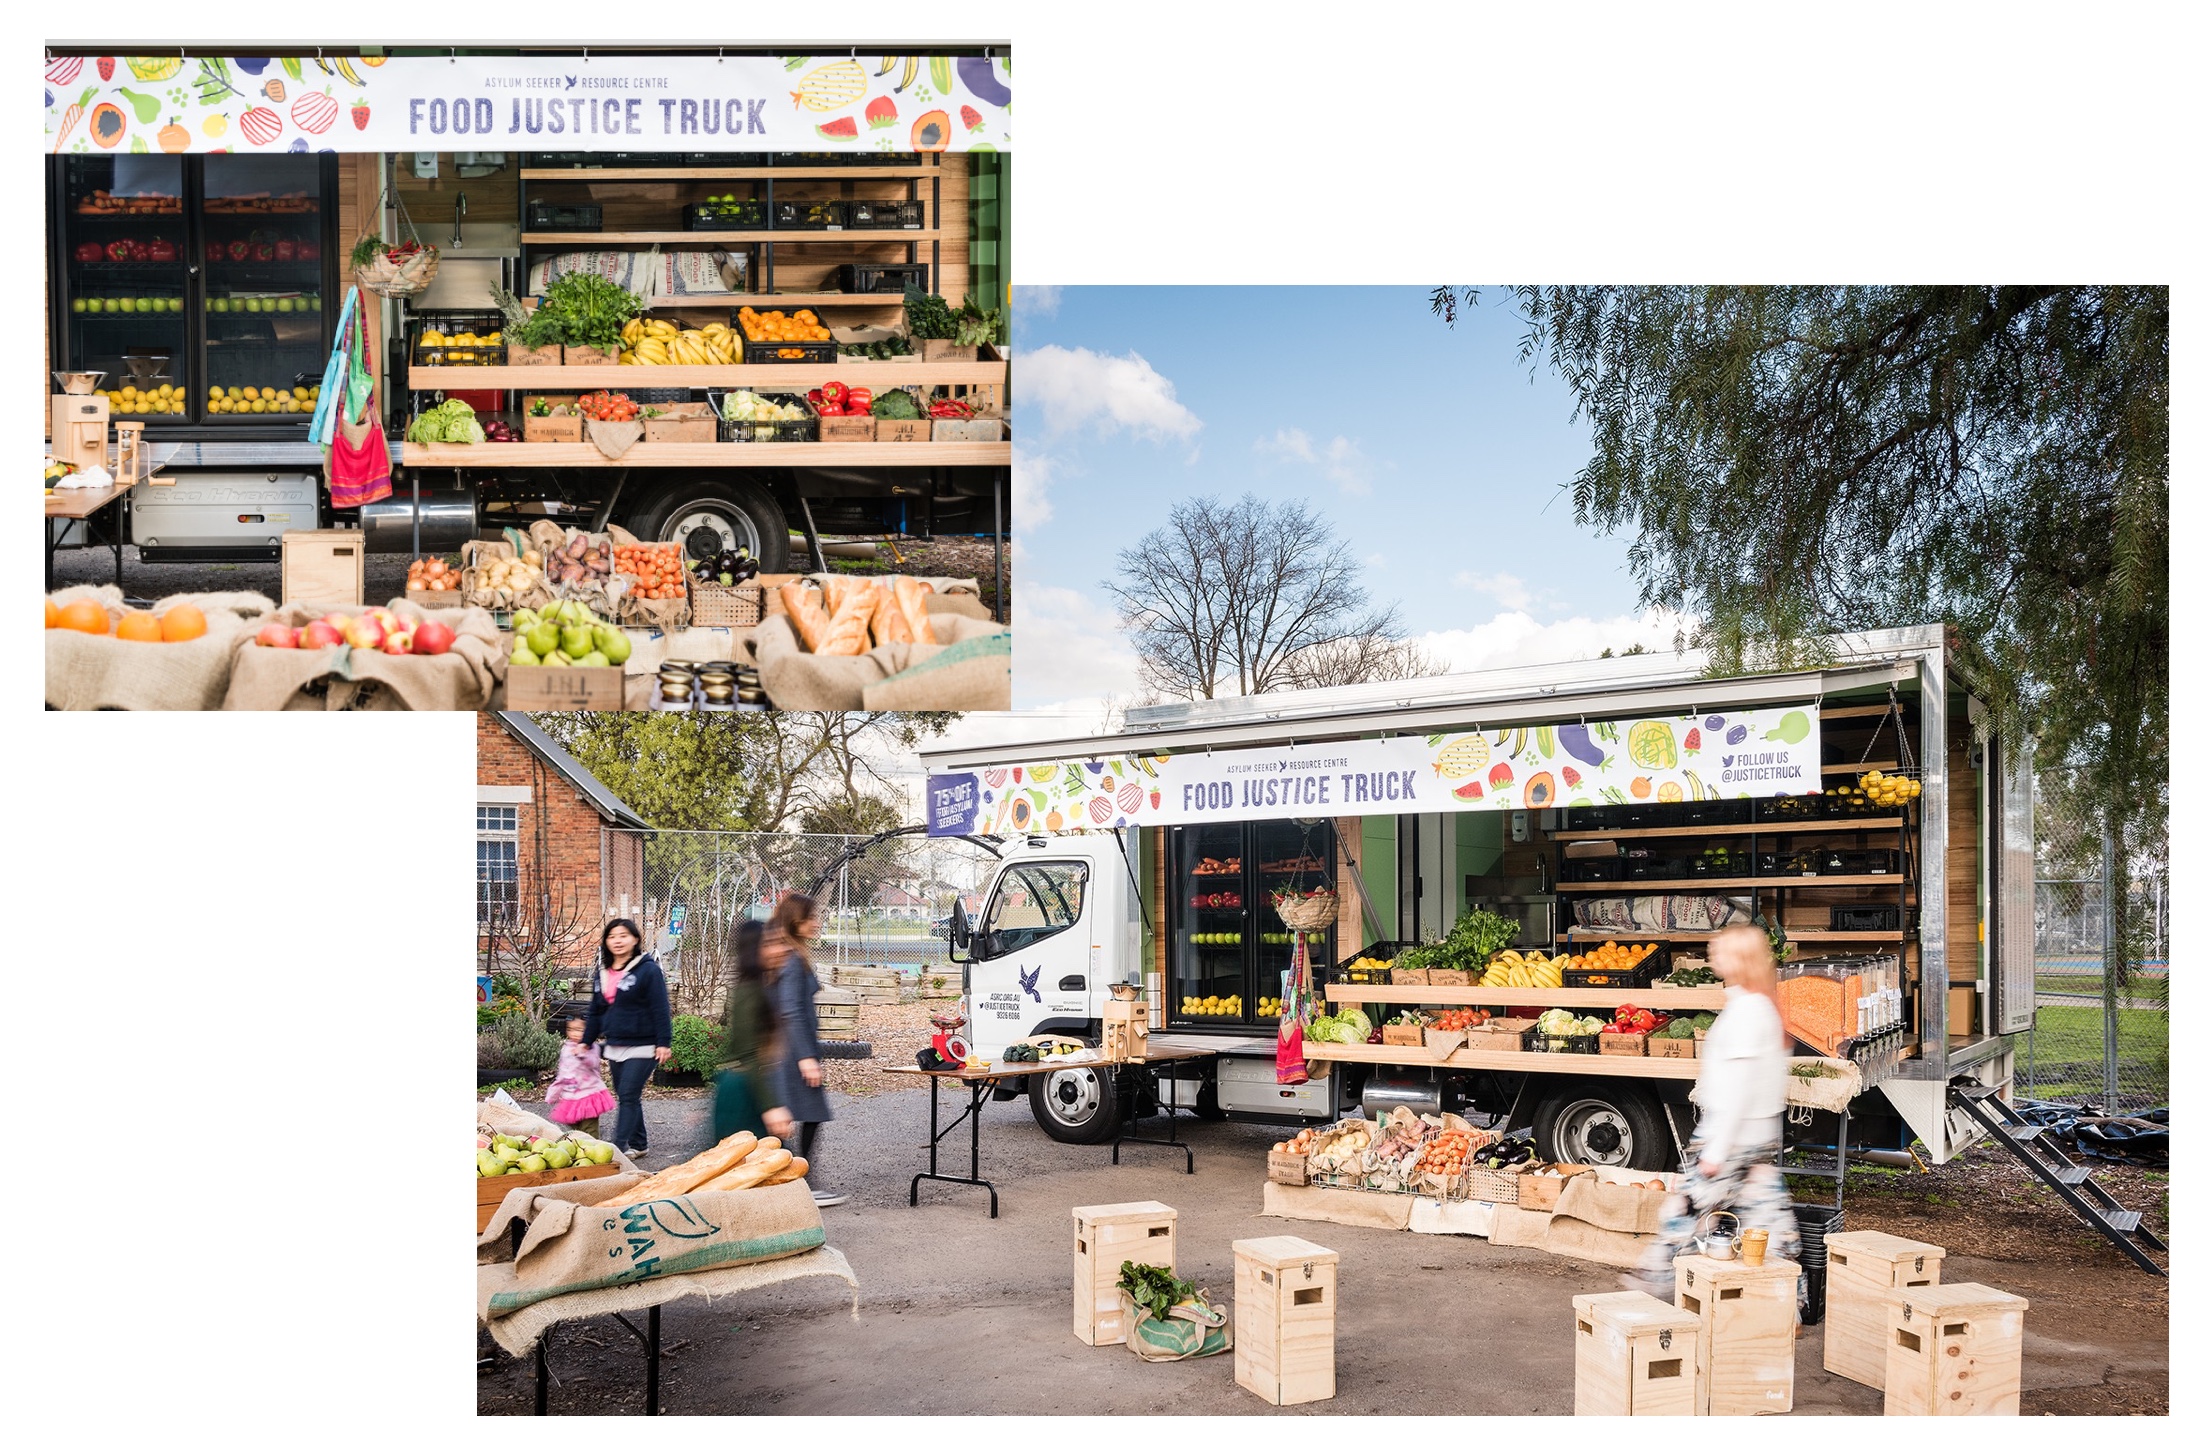 ASRC's Food Justice Truck